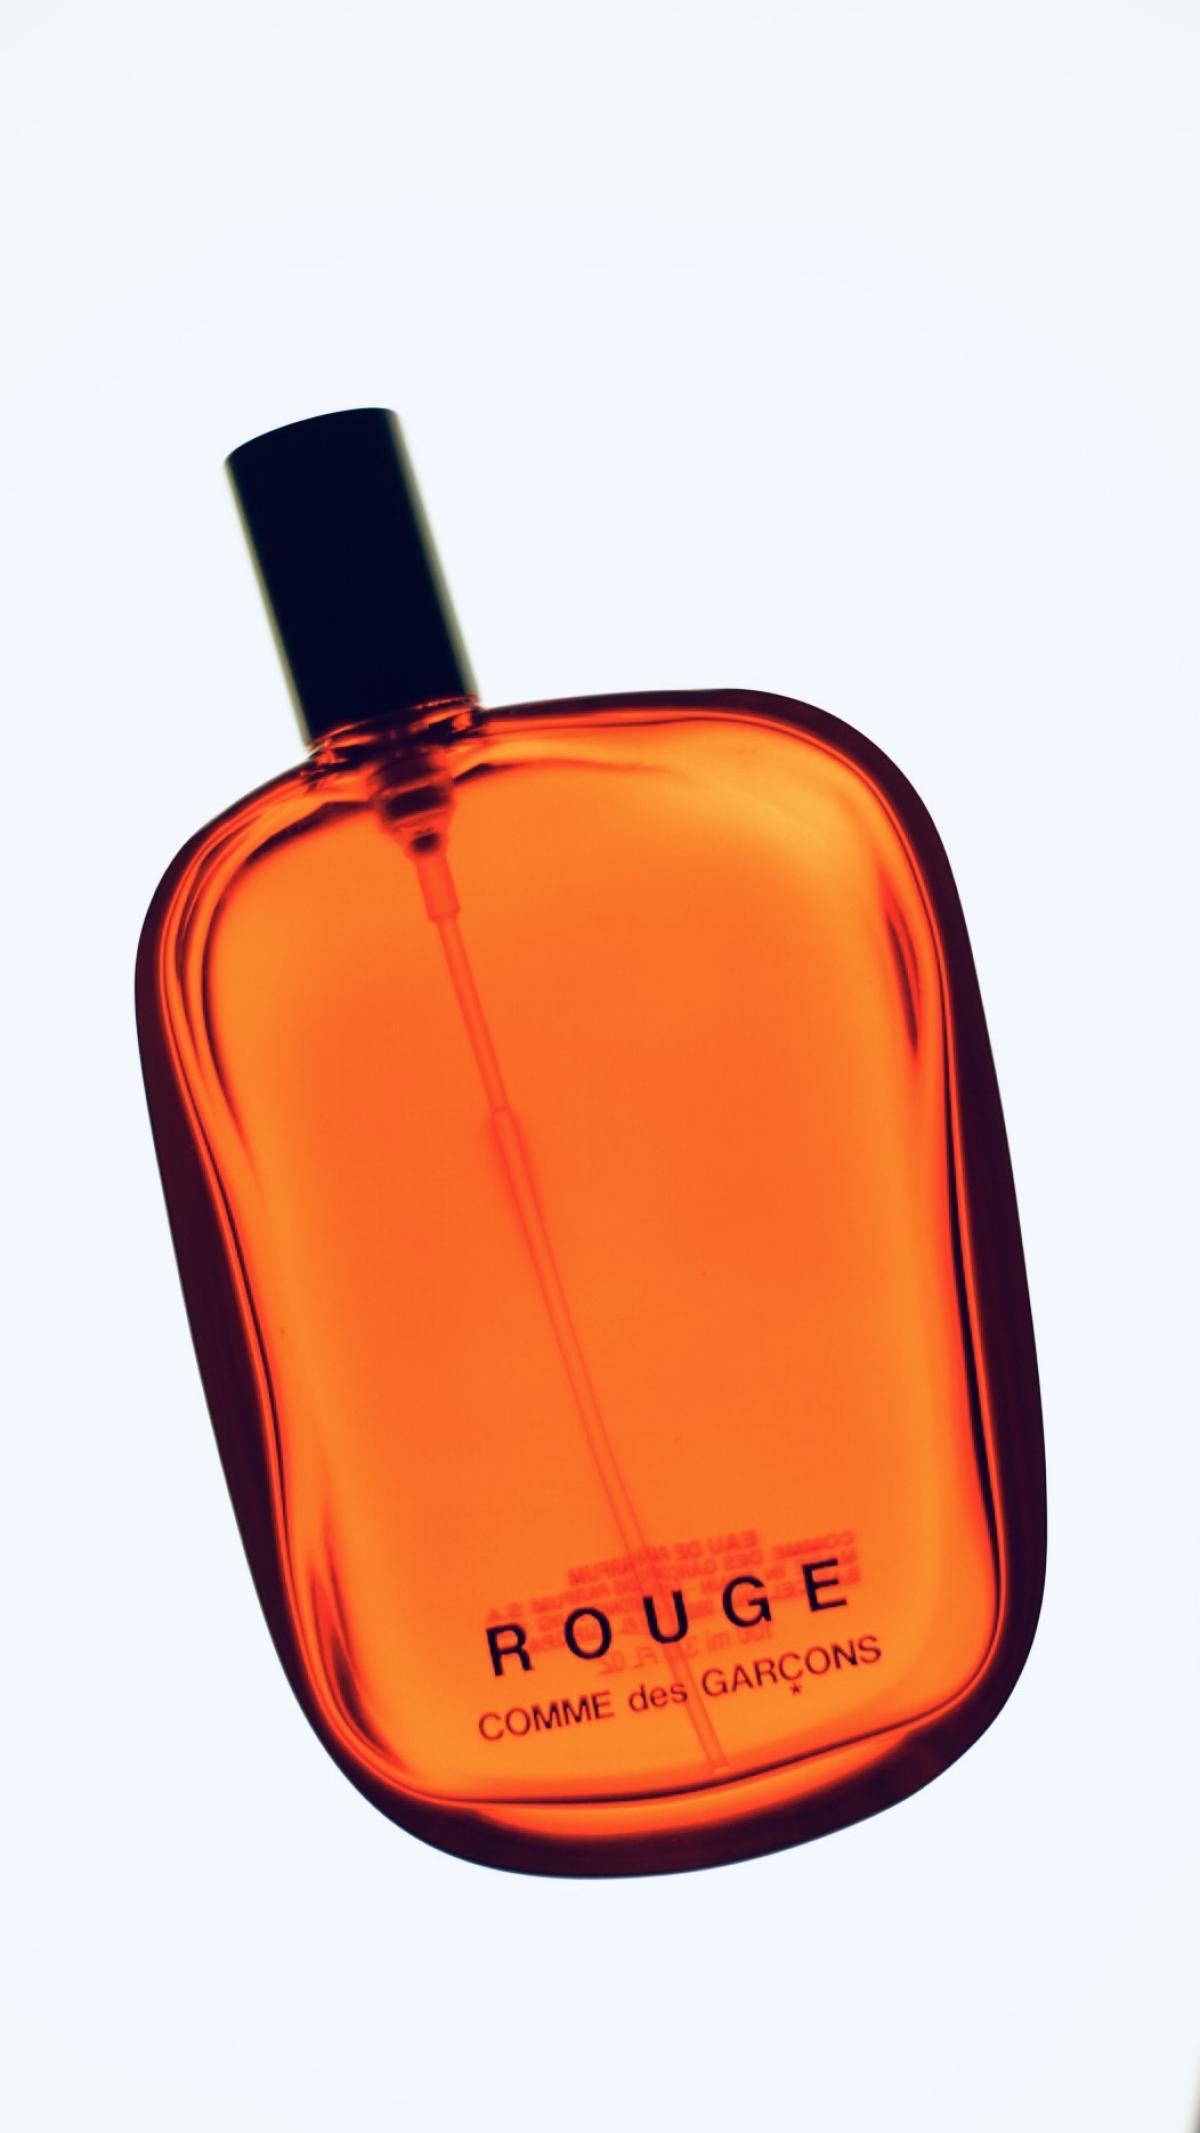 Rouge Comme des Garcons perfume - a fragrance for women and men 2020